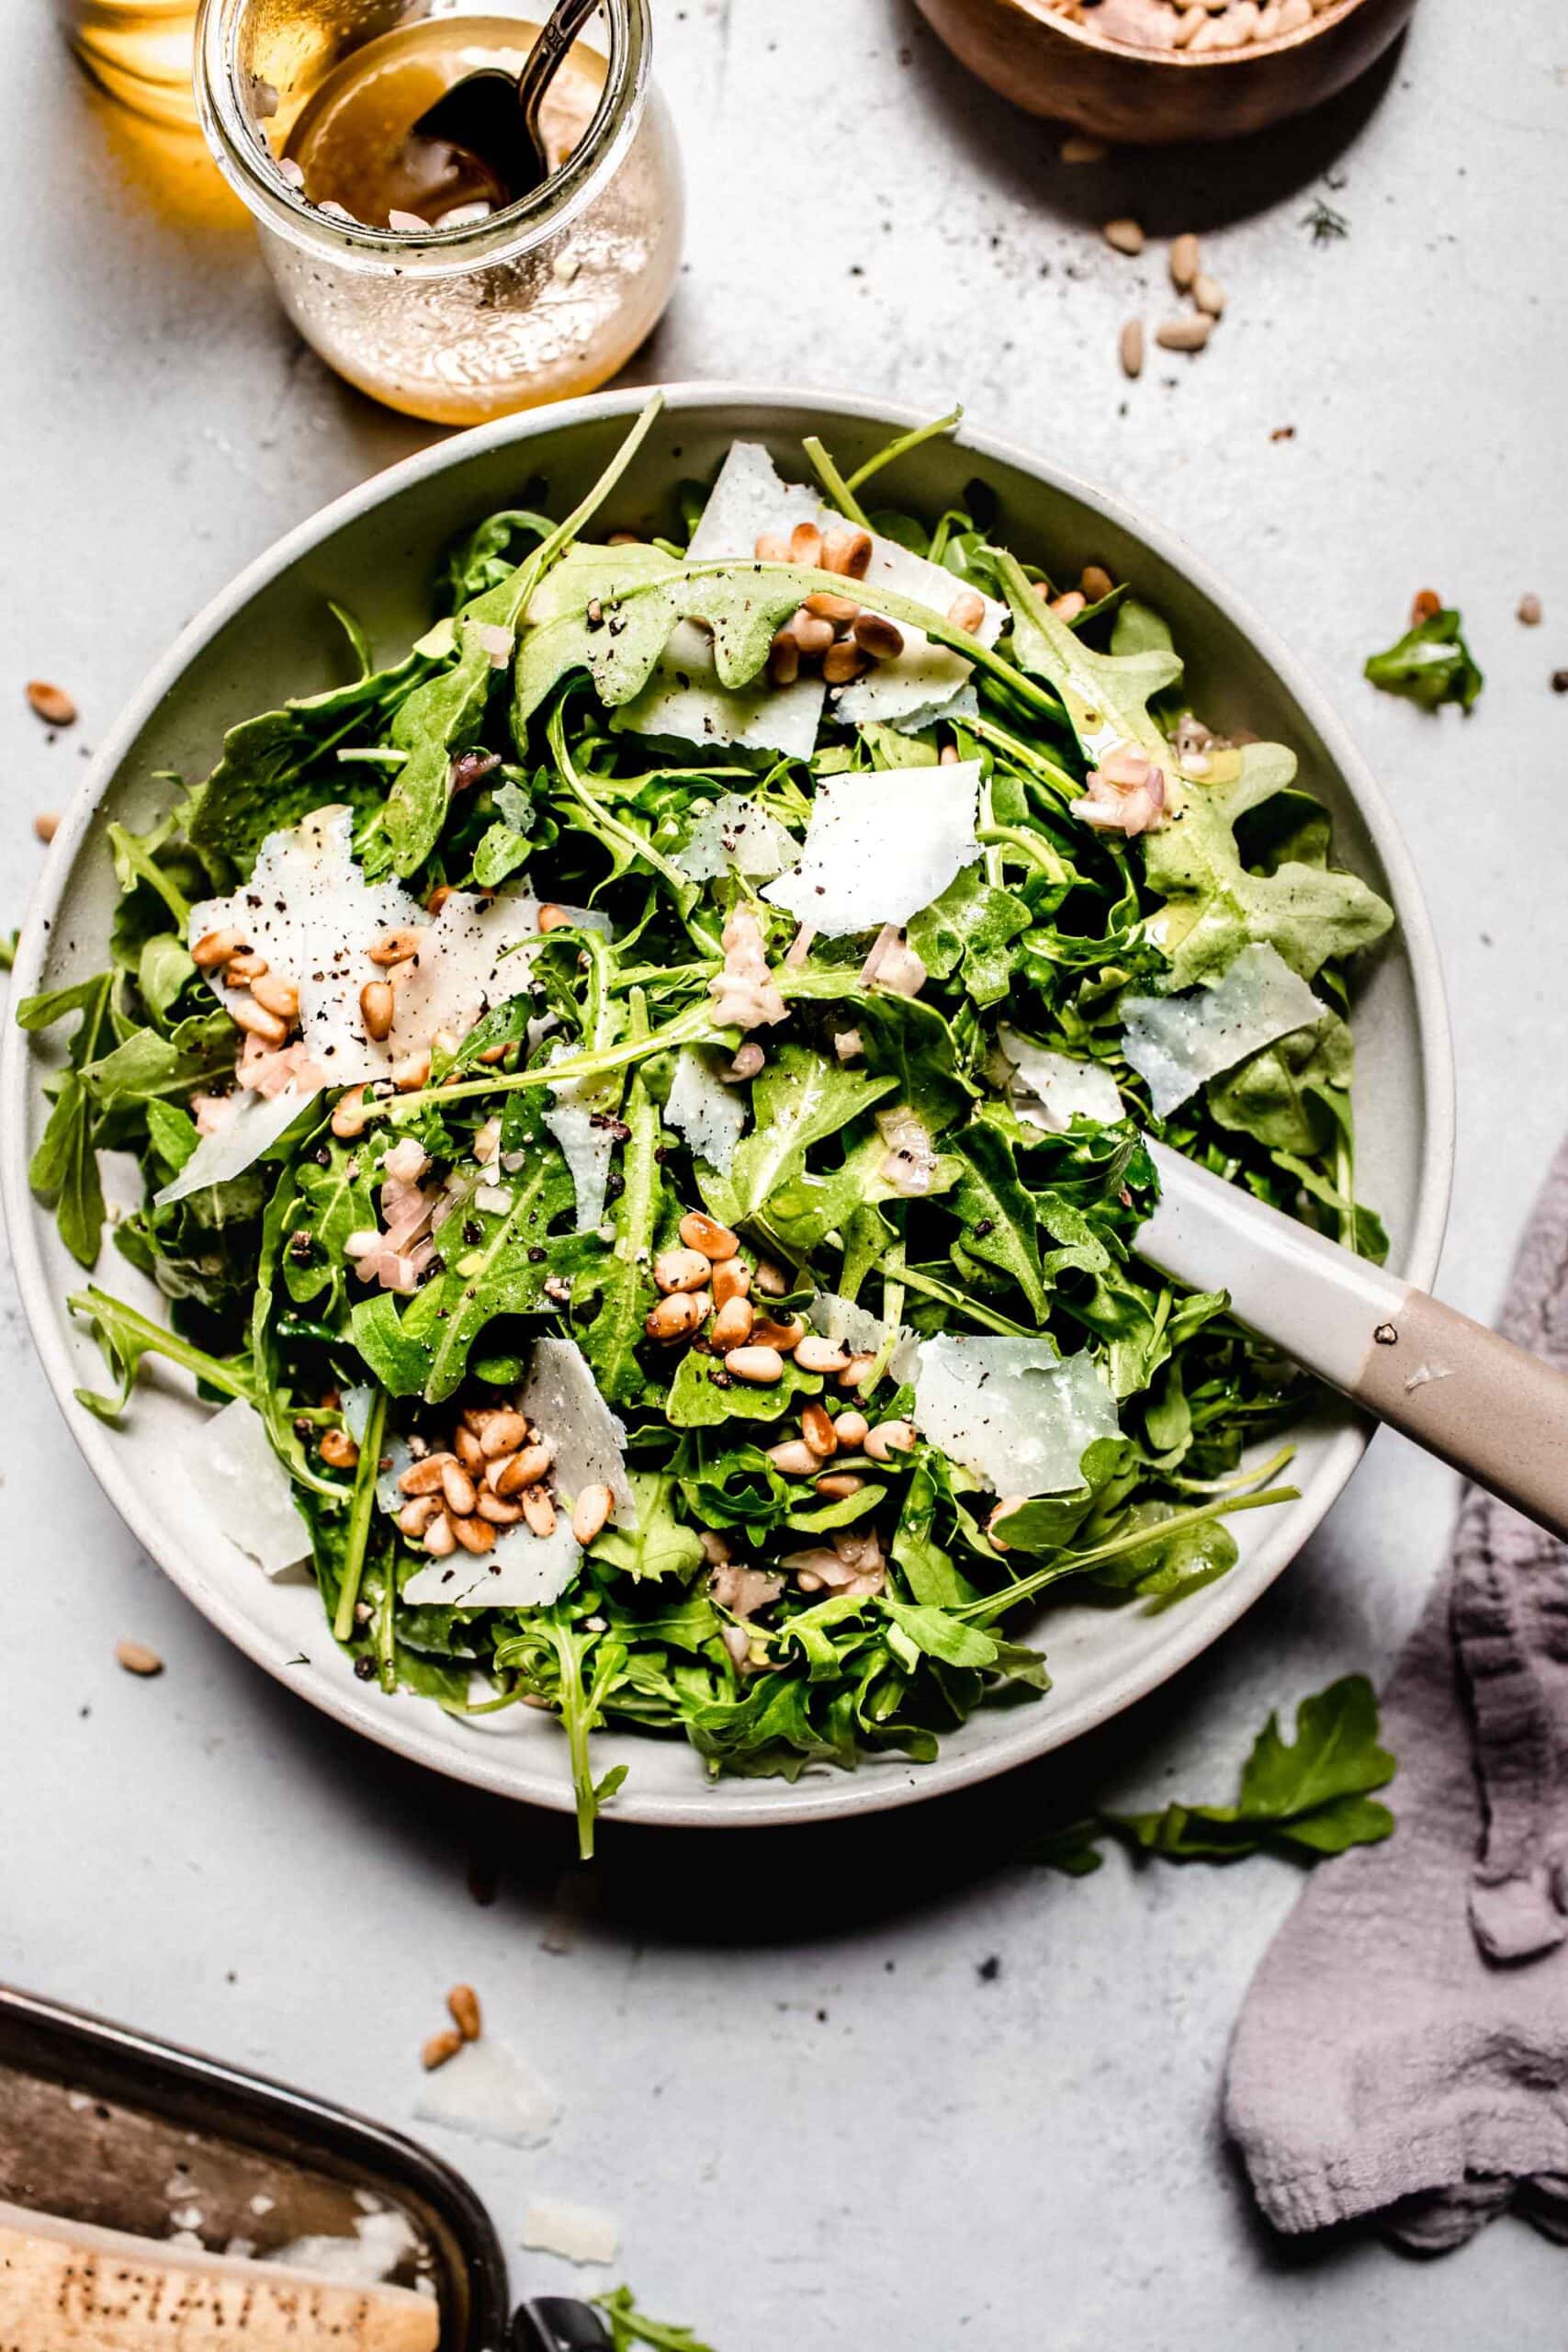 Chicken and Arugula Salad with Toasted Pine Nuts and a Balsamic